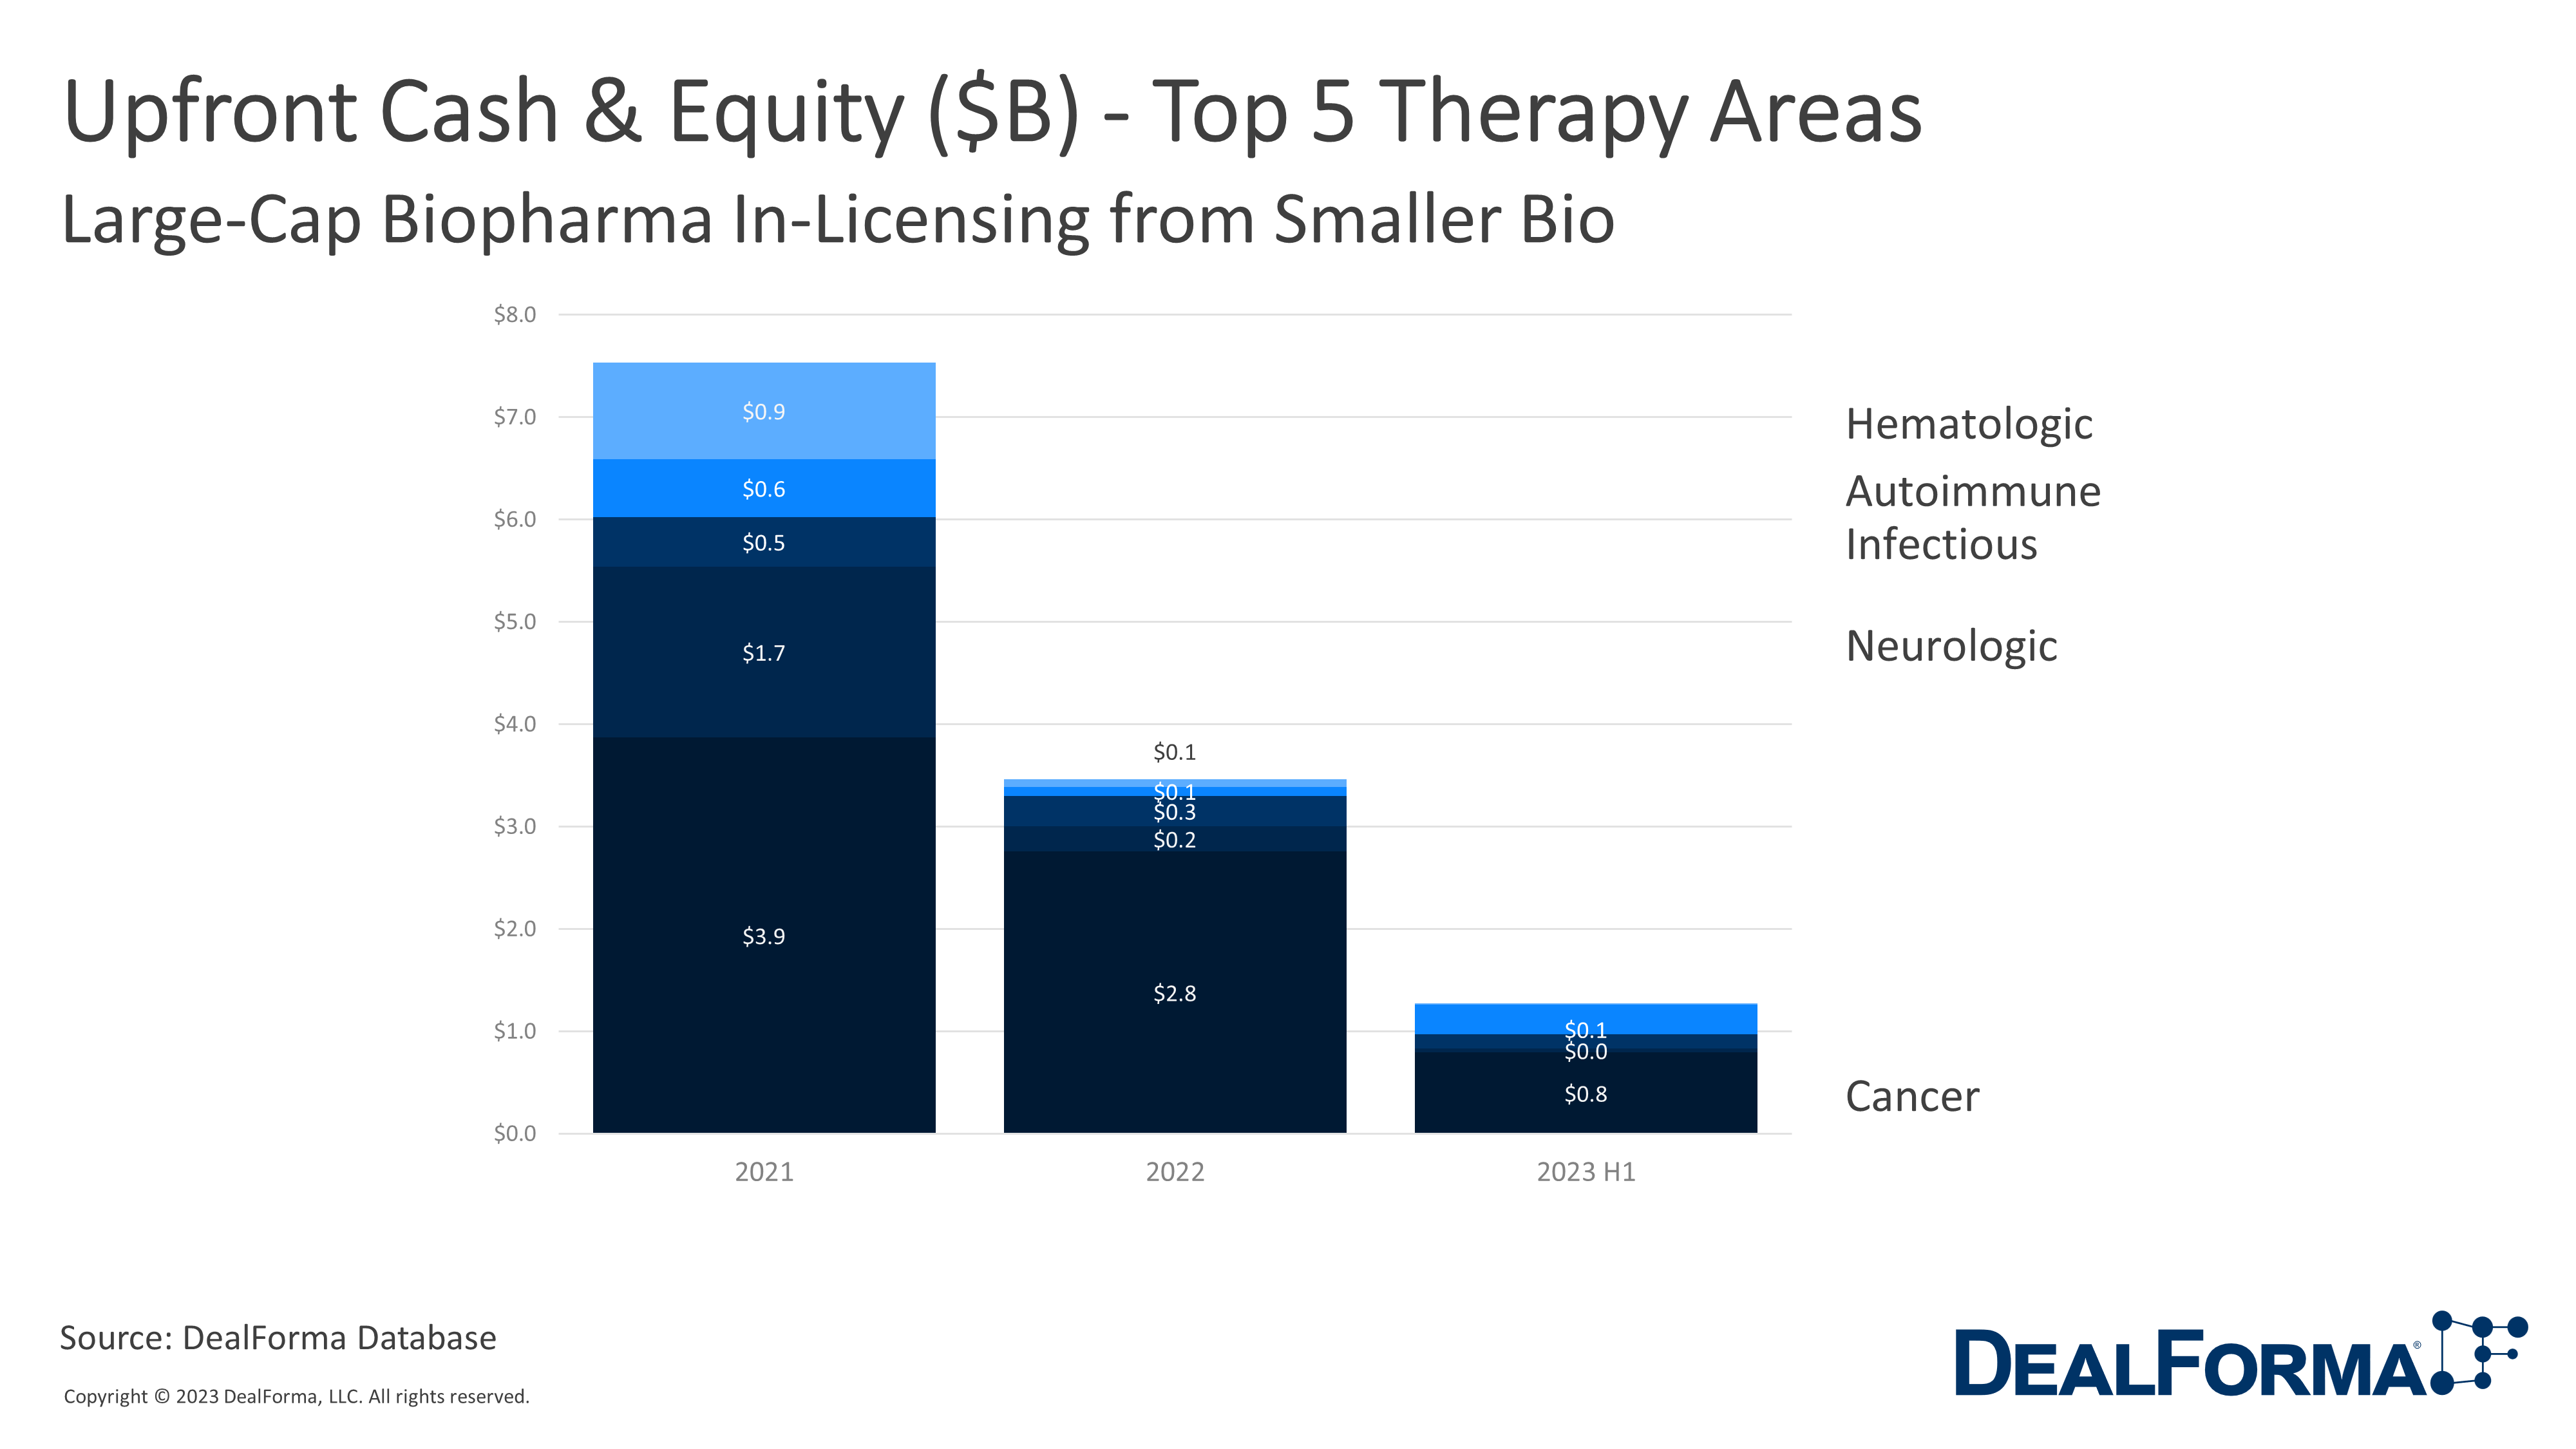 Upfront Cash & Equity ($B) - Top 5 Therapy Areas. Large-cap biopharma in-licensing from smaller bio - DealForma